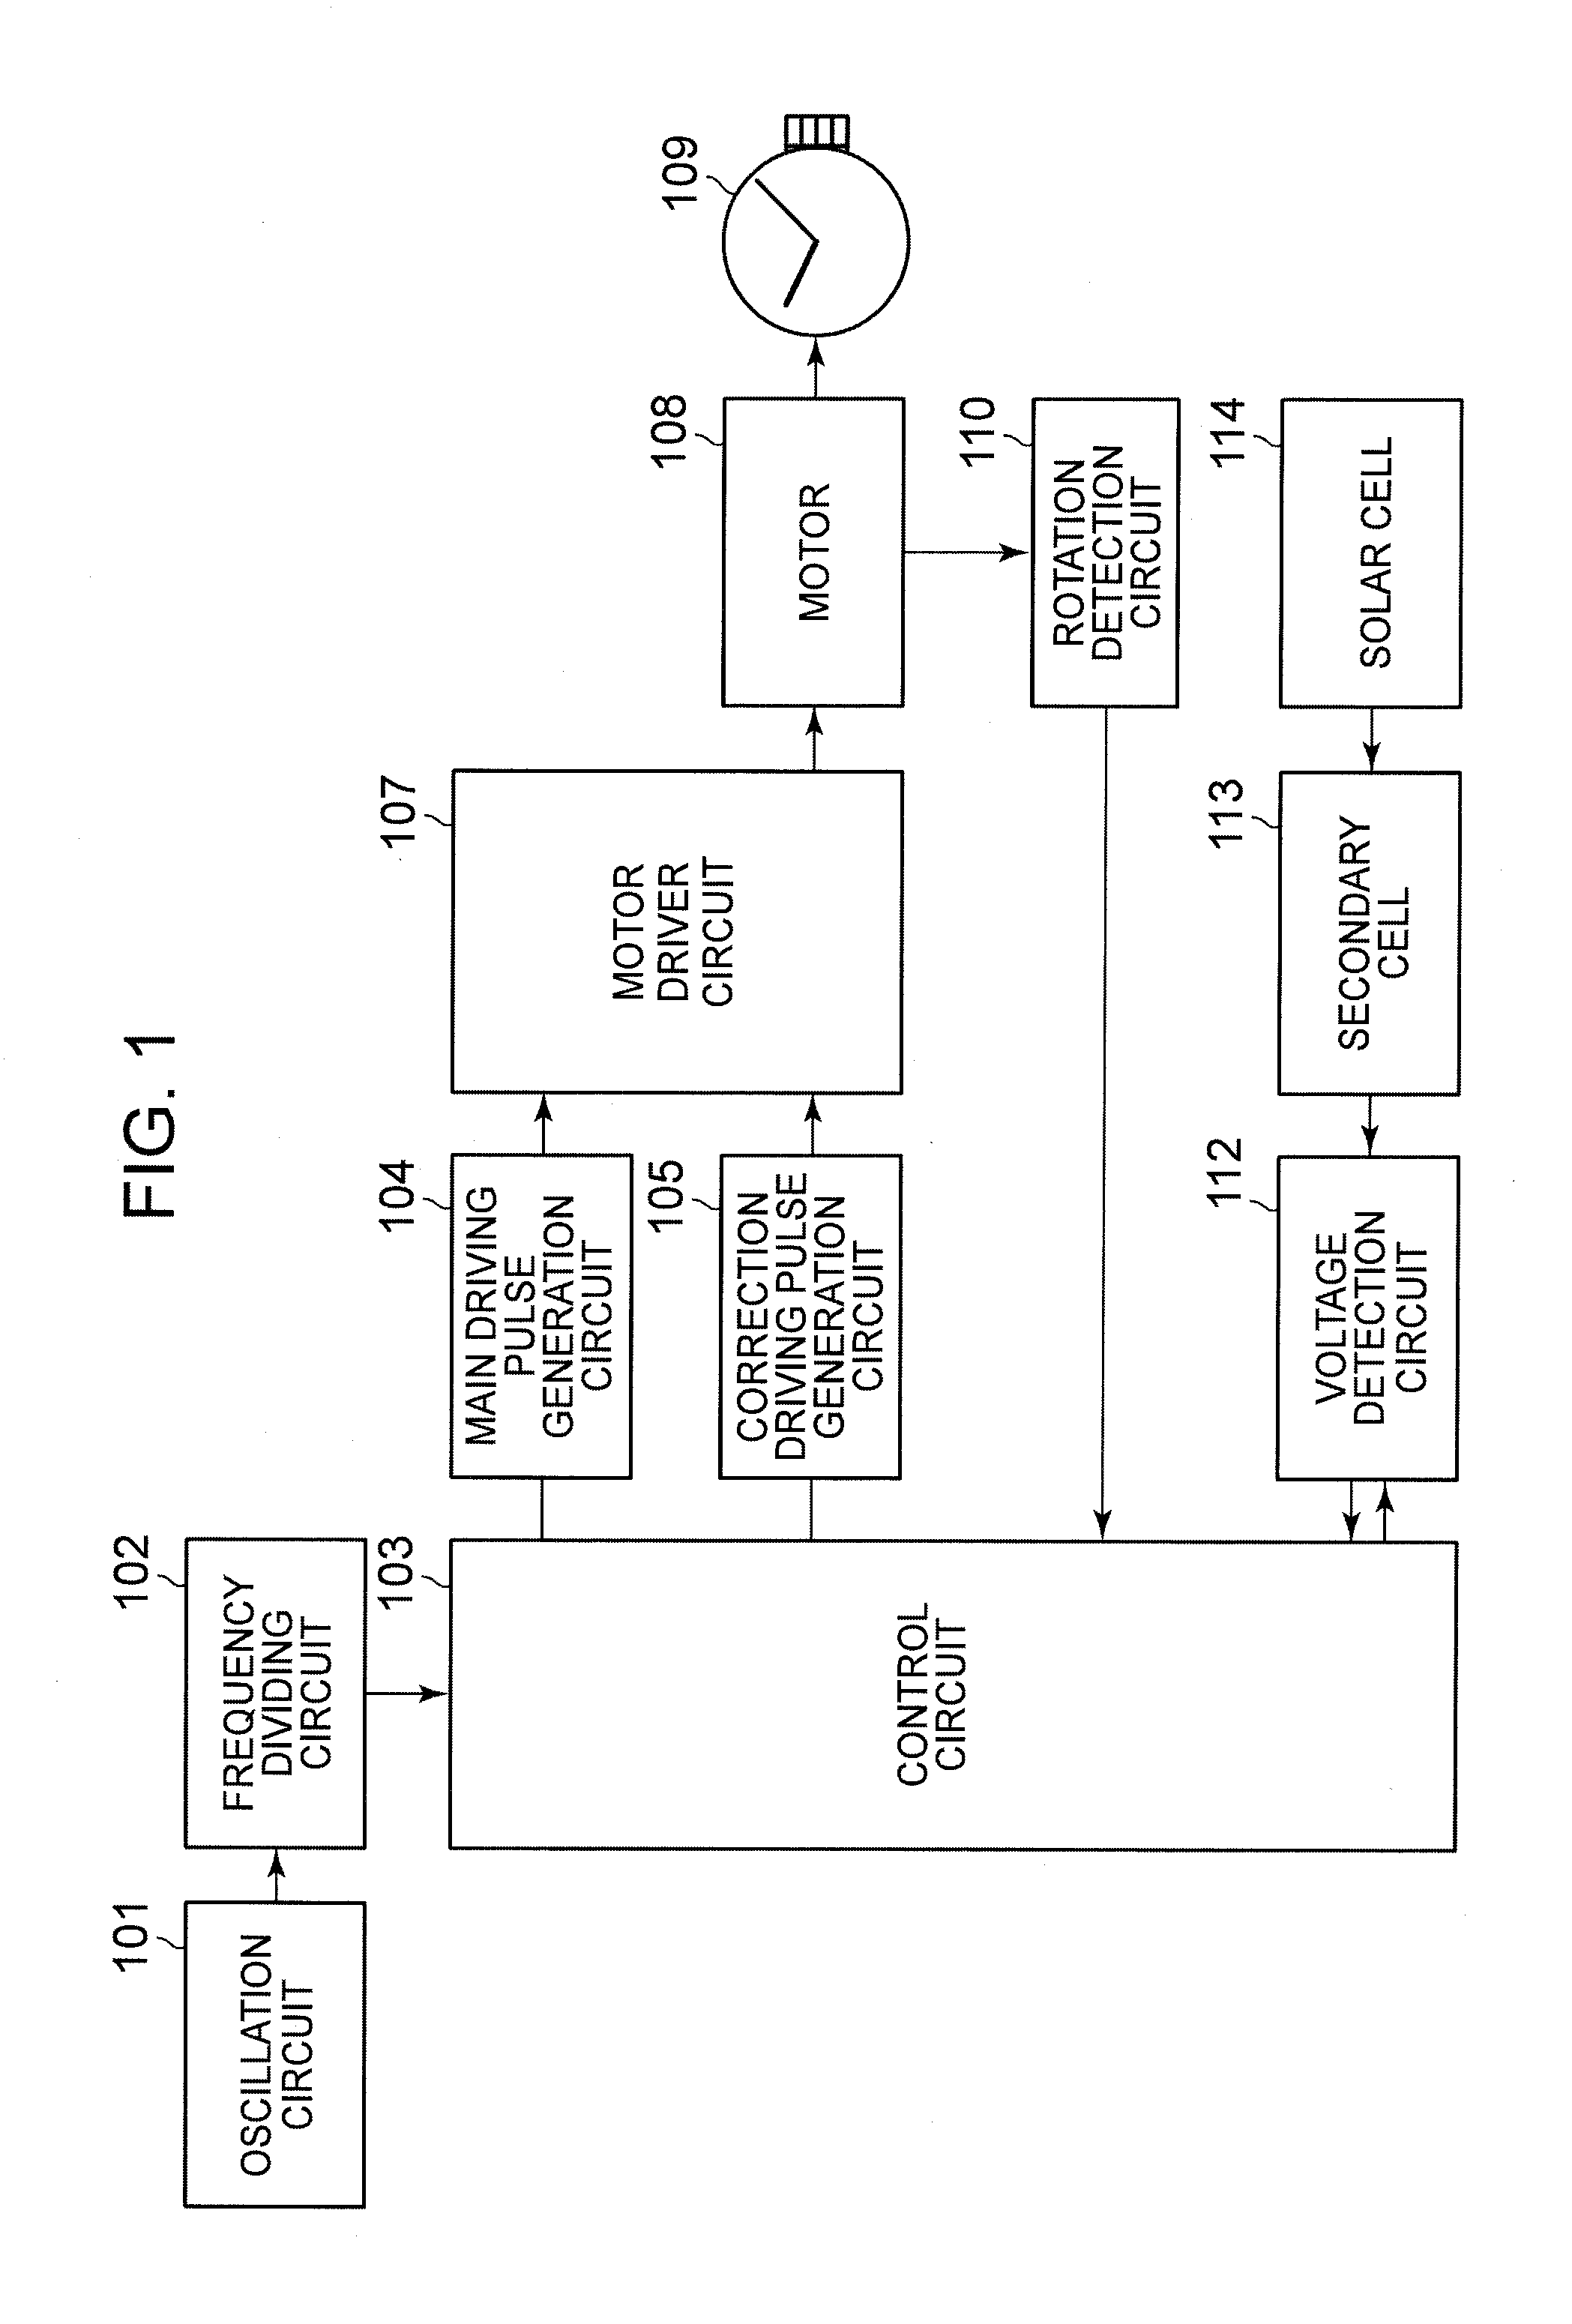 Stepping motor control circuit and analog electronic timepiece